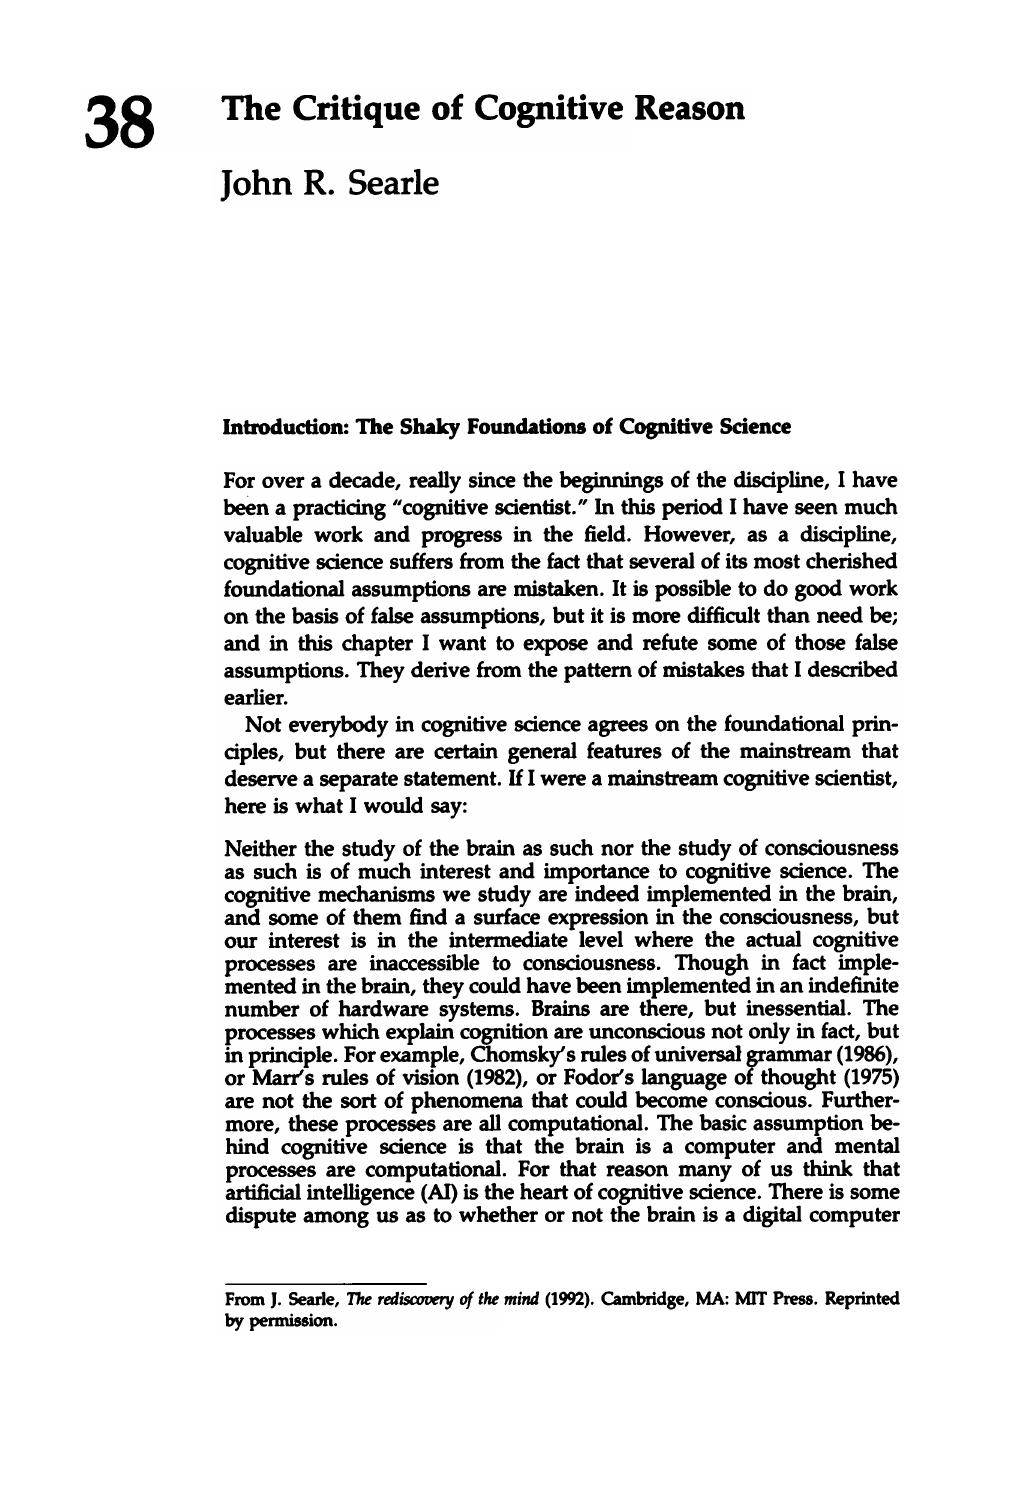 The Critique of Cognitive Reason (Chapter 38)